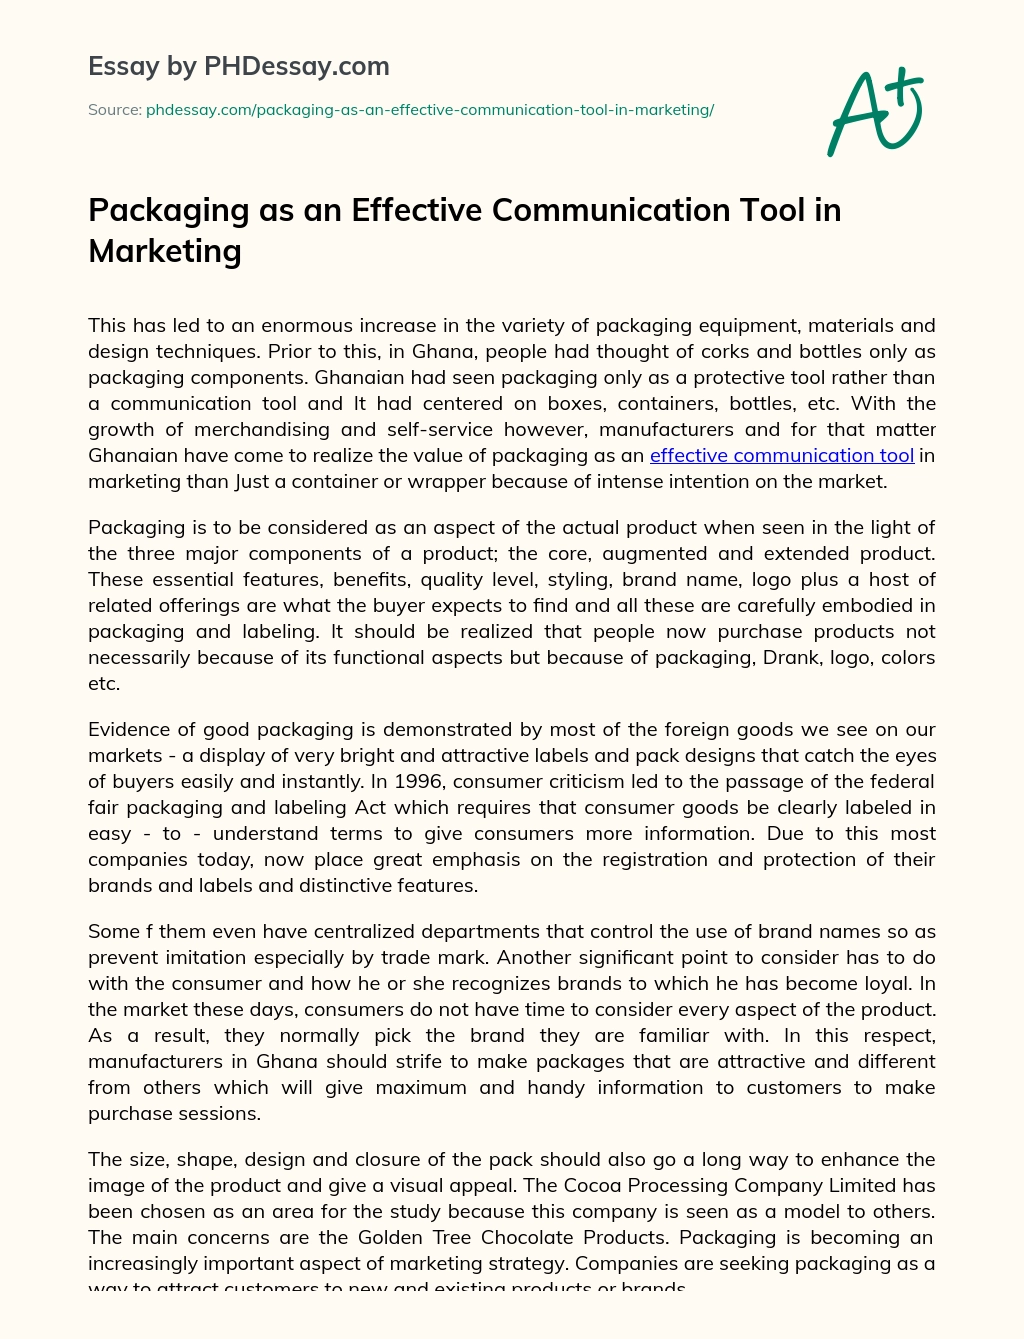 Packaging as an Effective Communication Tool in Marketing essay